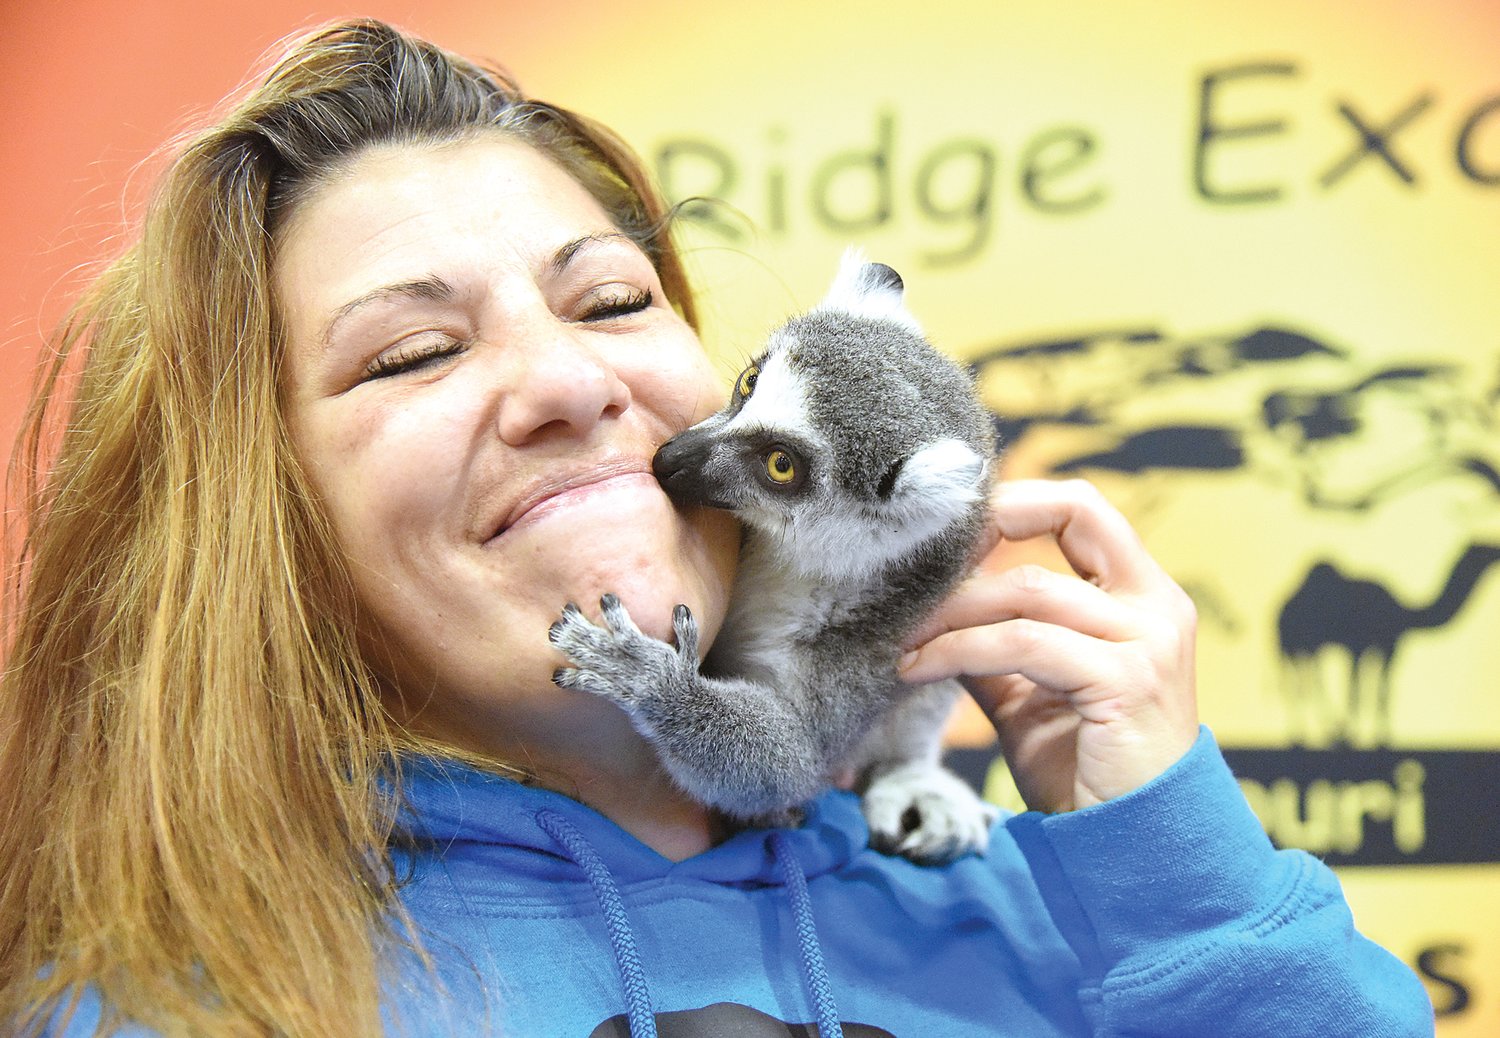 During the Home and Garden Show Saturday, Jen Colantino, of Sedalia, gets a kiss from a lemur at vendor Thorni Ridge Exotics’ booth. “Oh, he’s so sweet,” Colantino said of the affectionate primate.